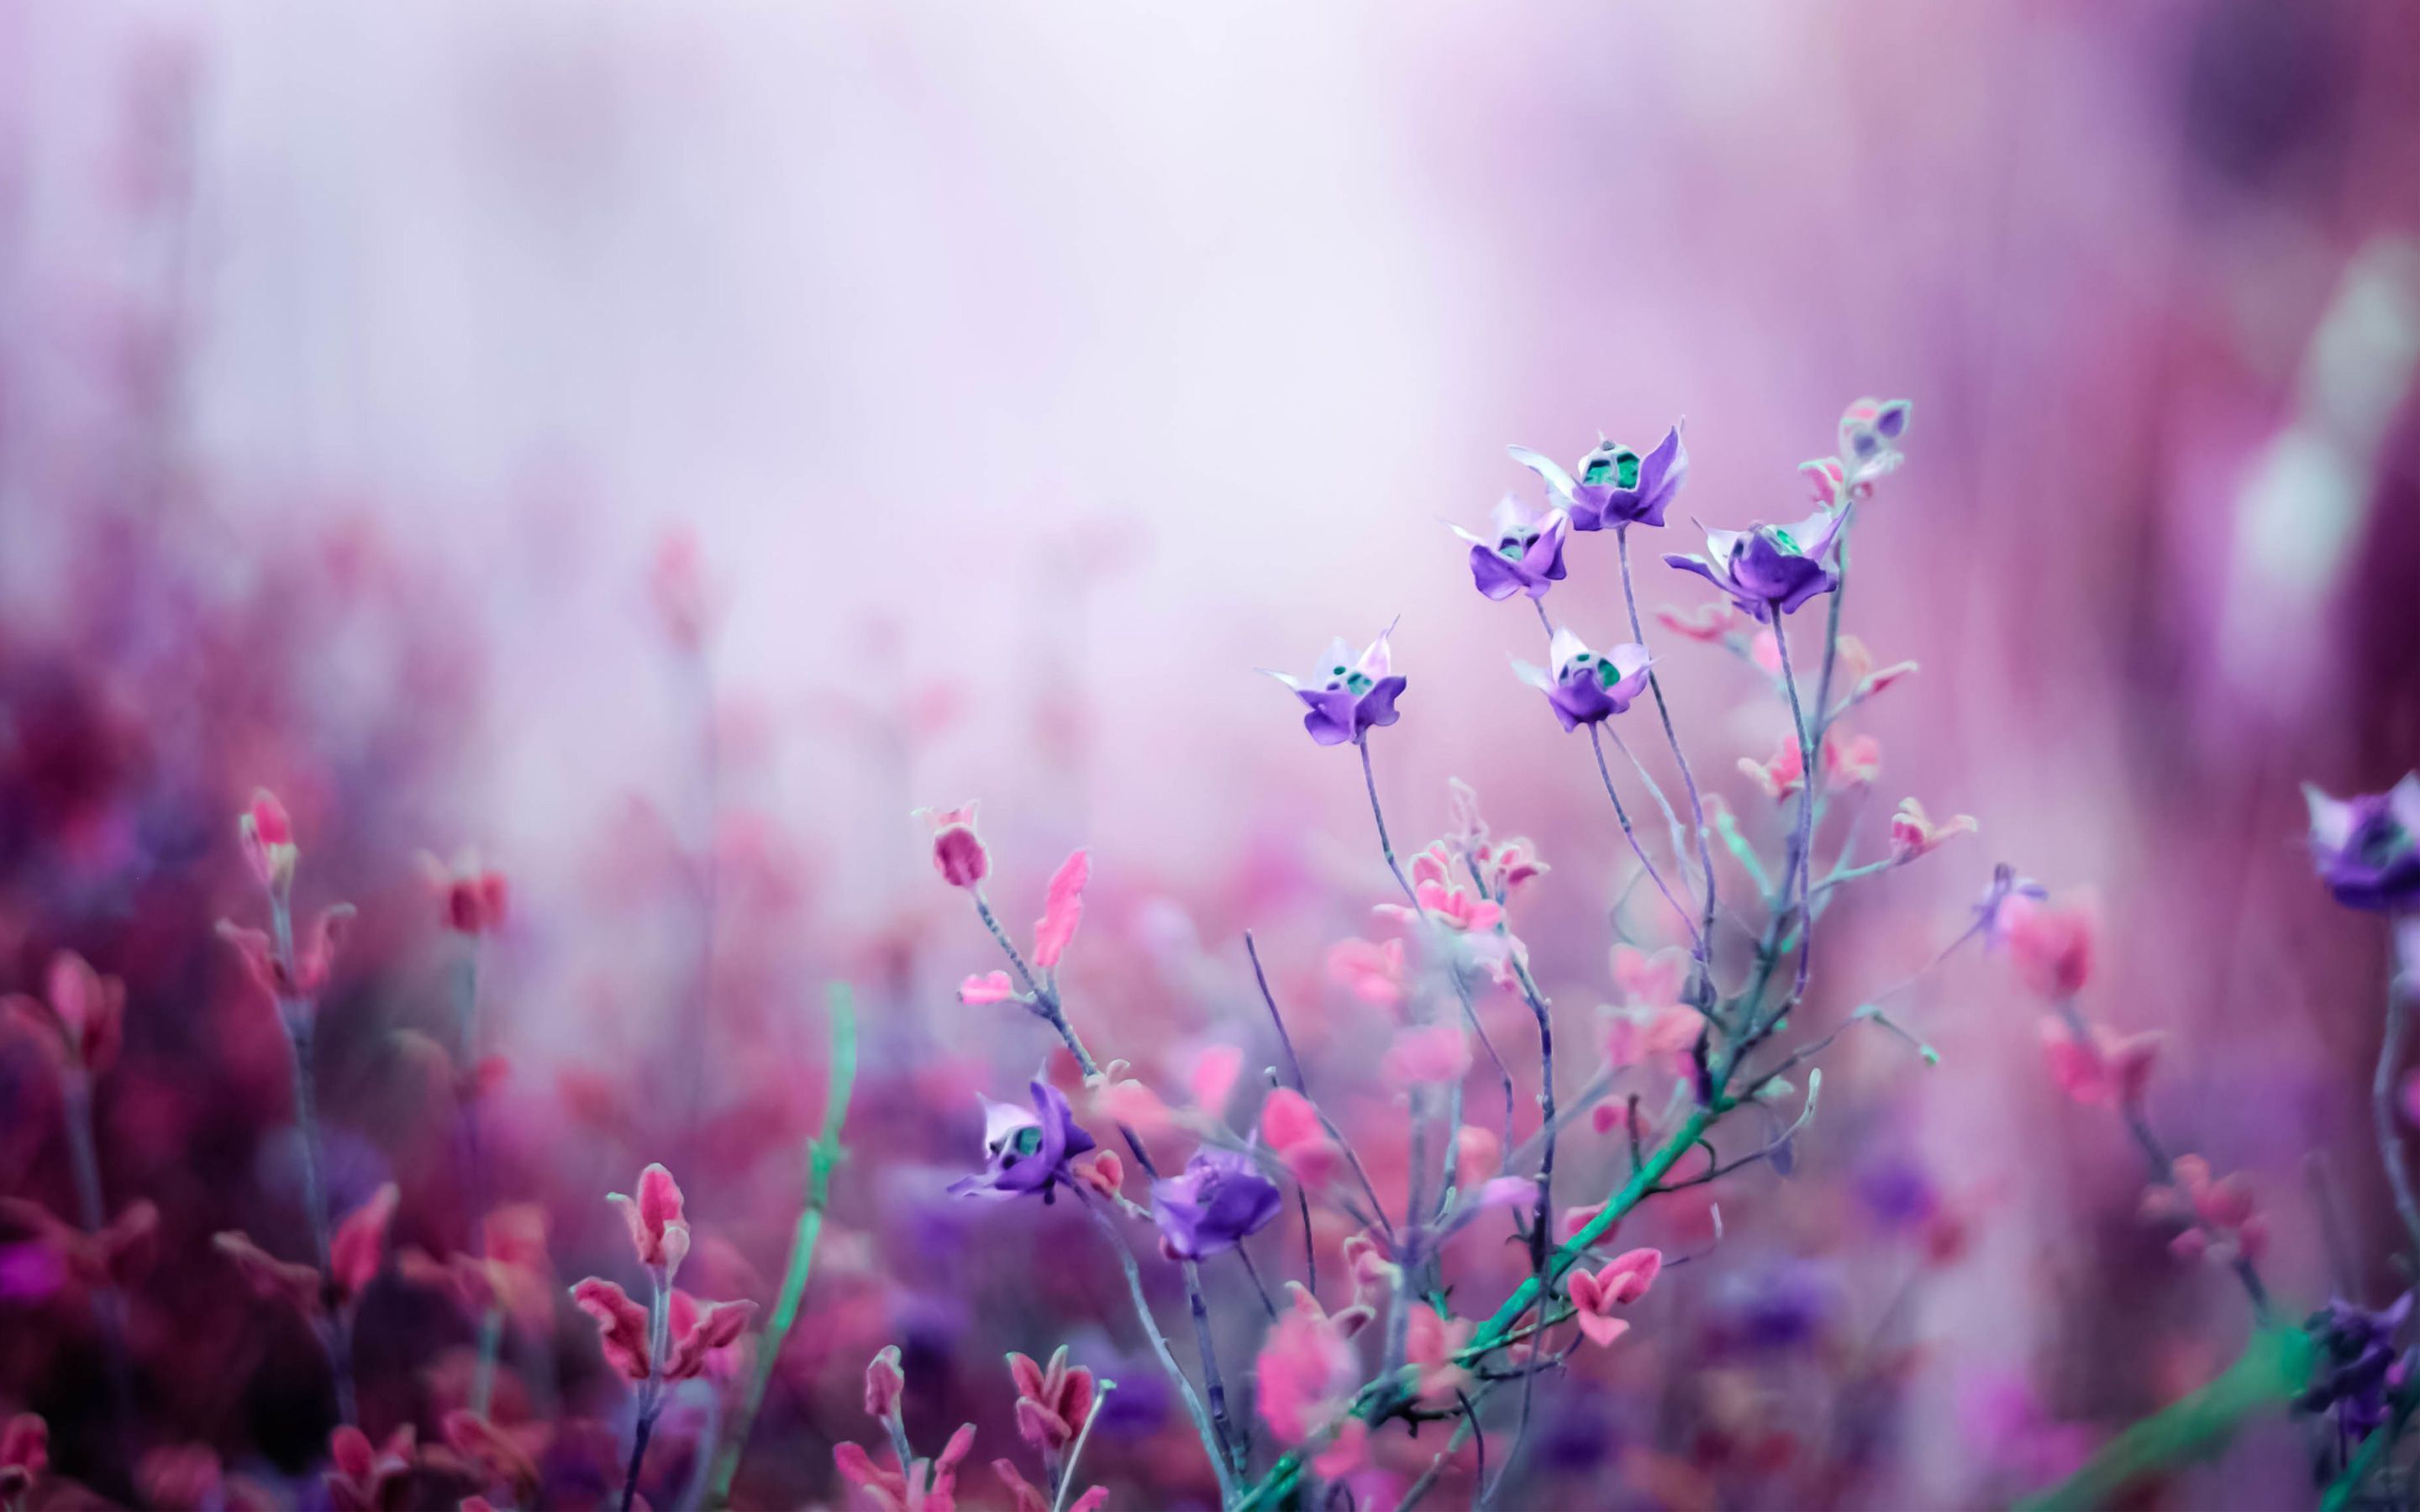 Flower HD Wallpapers Free download 